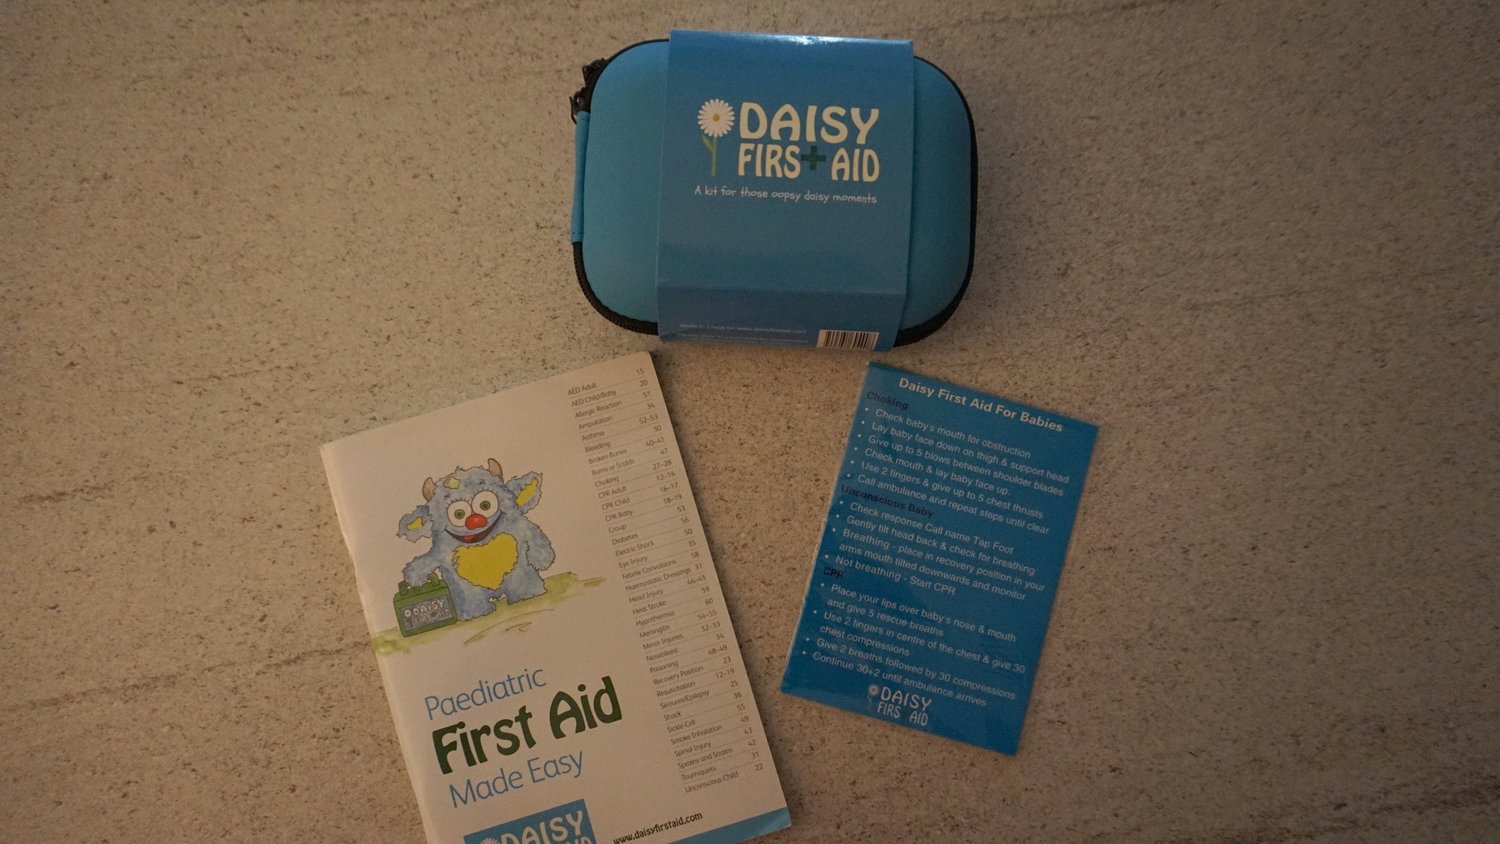 THE DAISY FIRST AID KIT - THE PERFECT SIZE FOR A NAPPY BAG